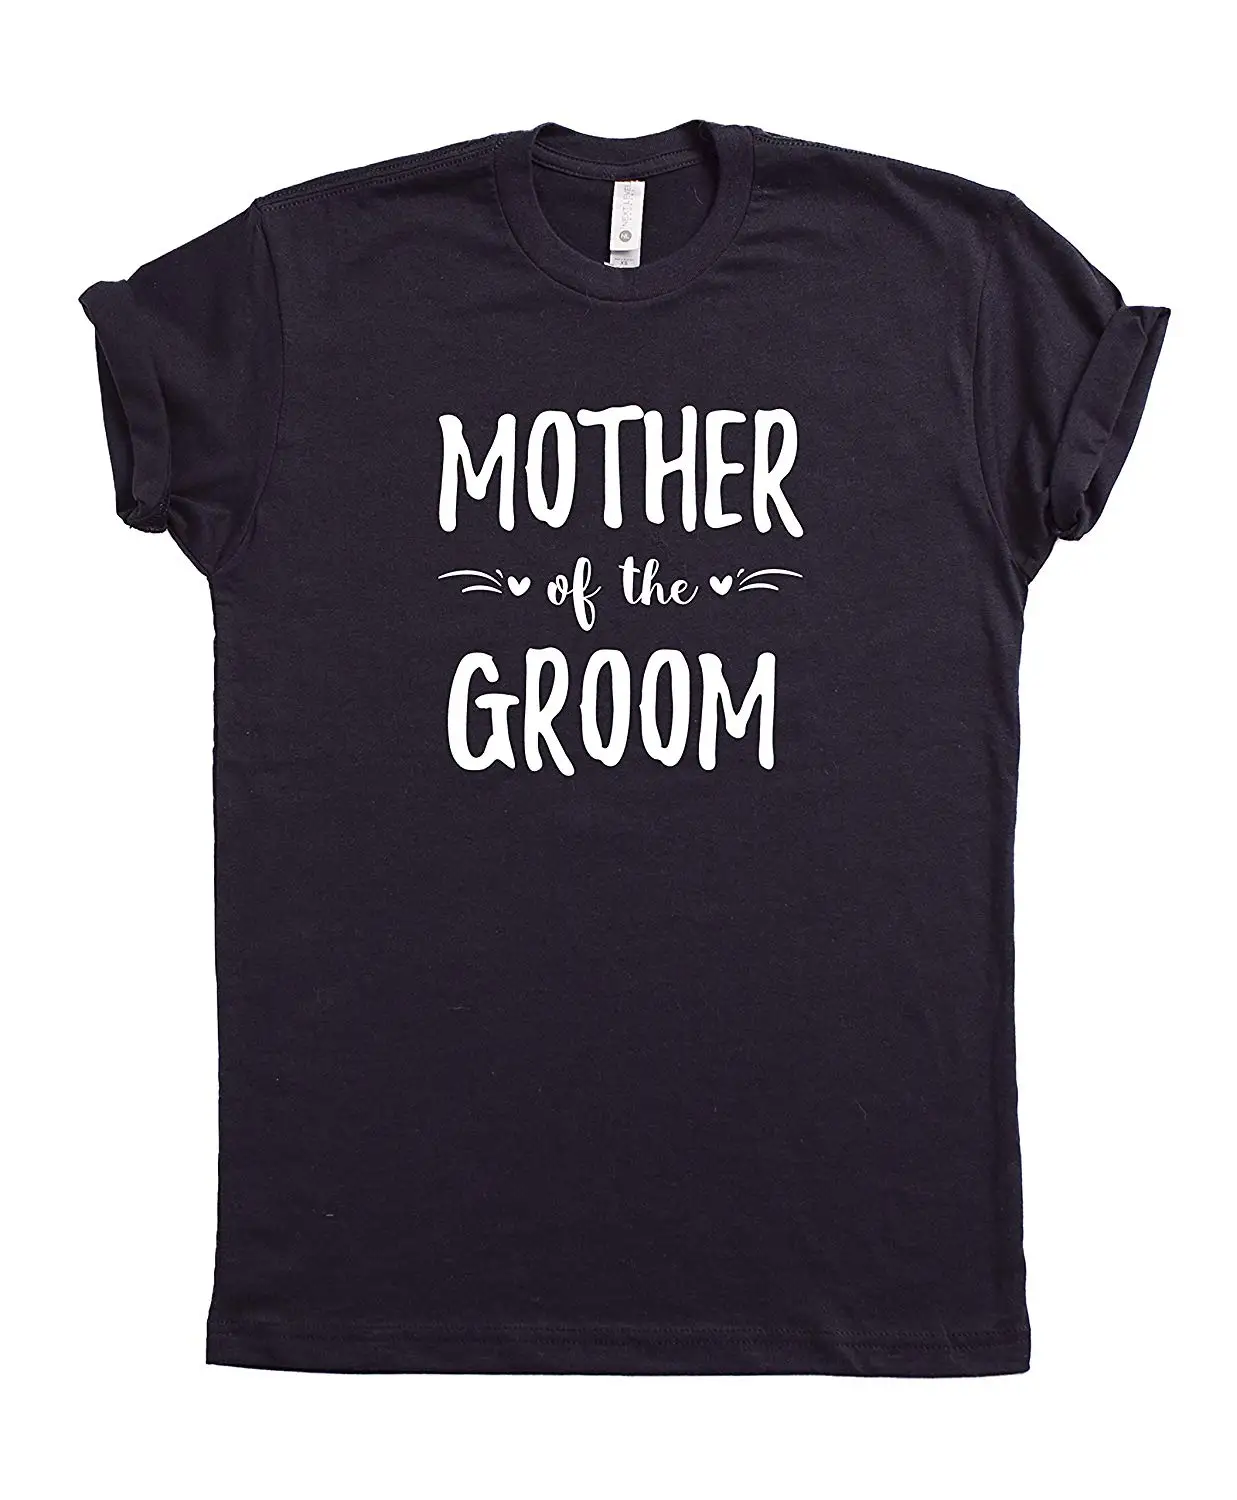 Cheap Groom T Shirts Find Groom T Shirts Deals On Line At Alibaba Com